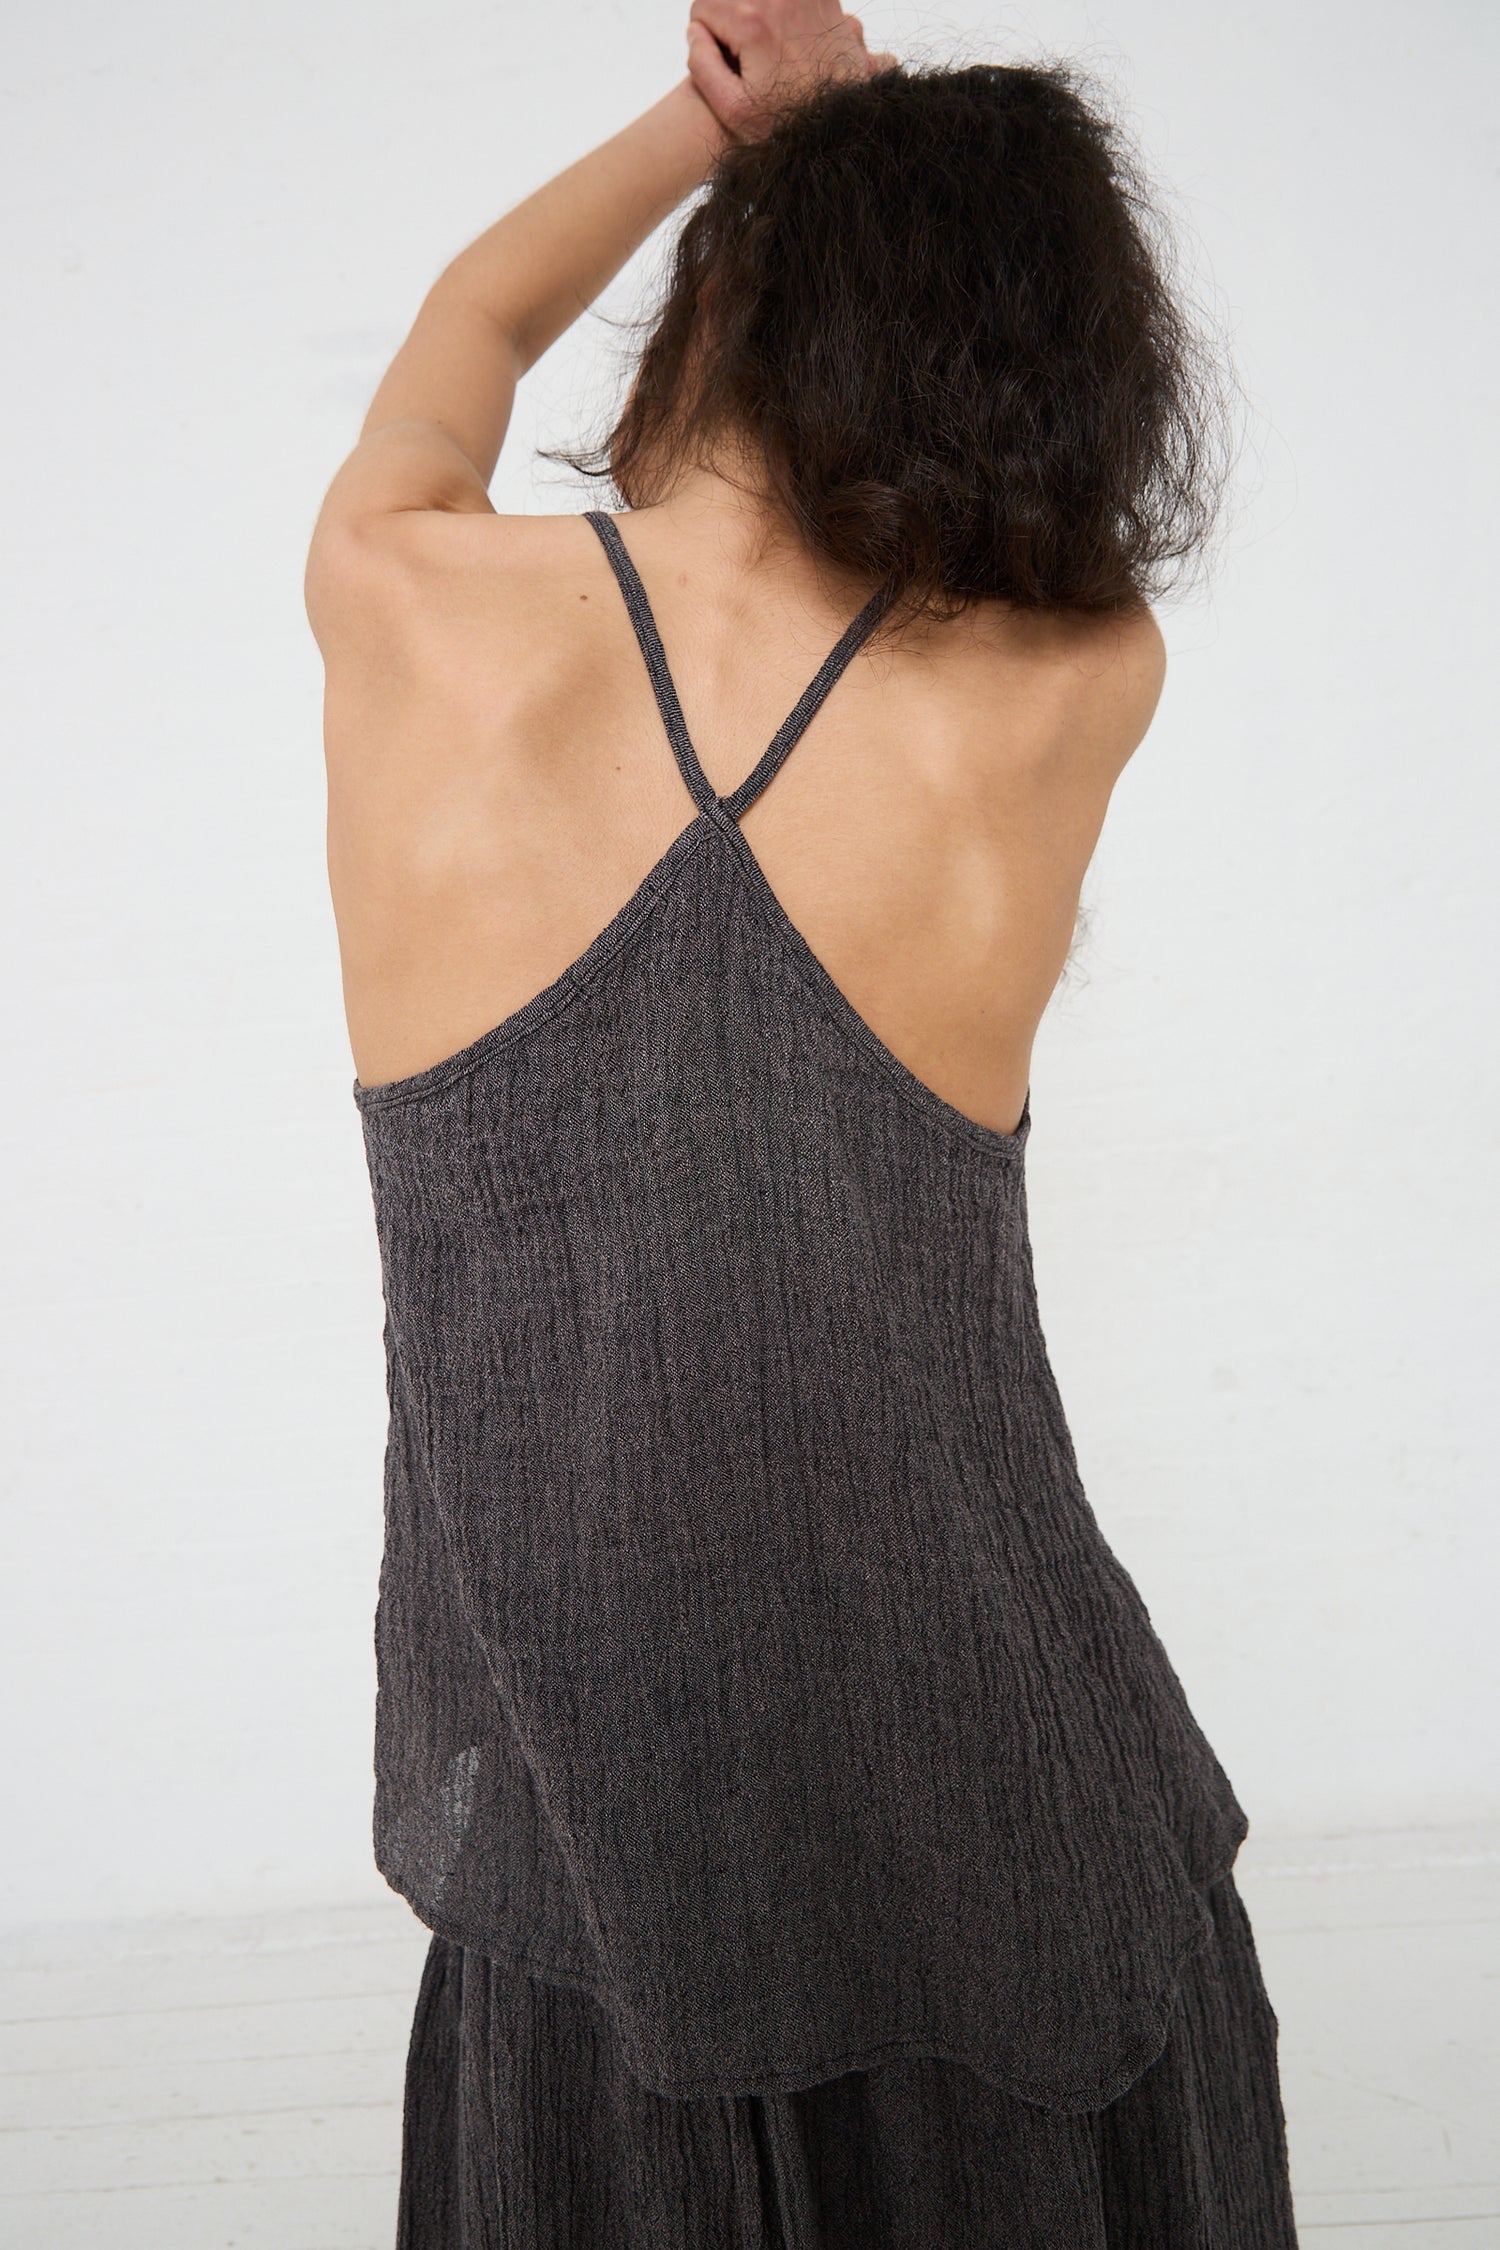 A woman seen from behind, wearing a sleeveless, Linen Textured Camisole in Grey Navy with crossed back straps by Black Crane.